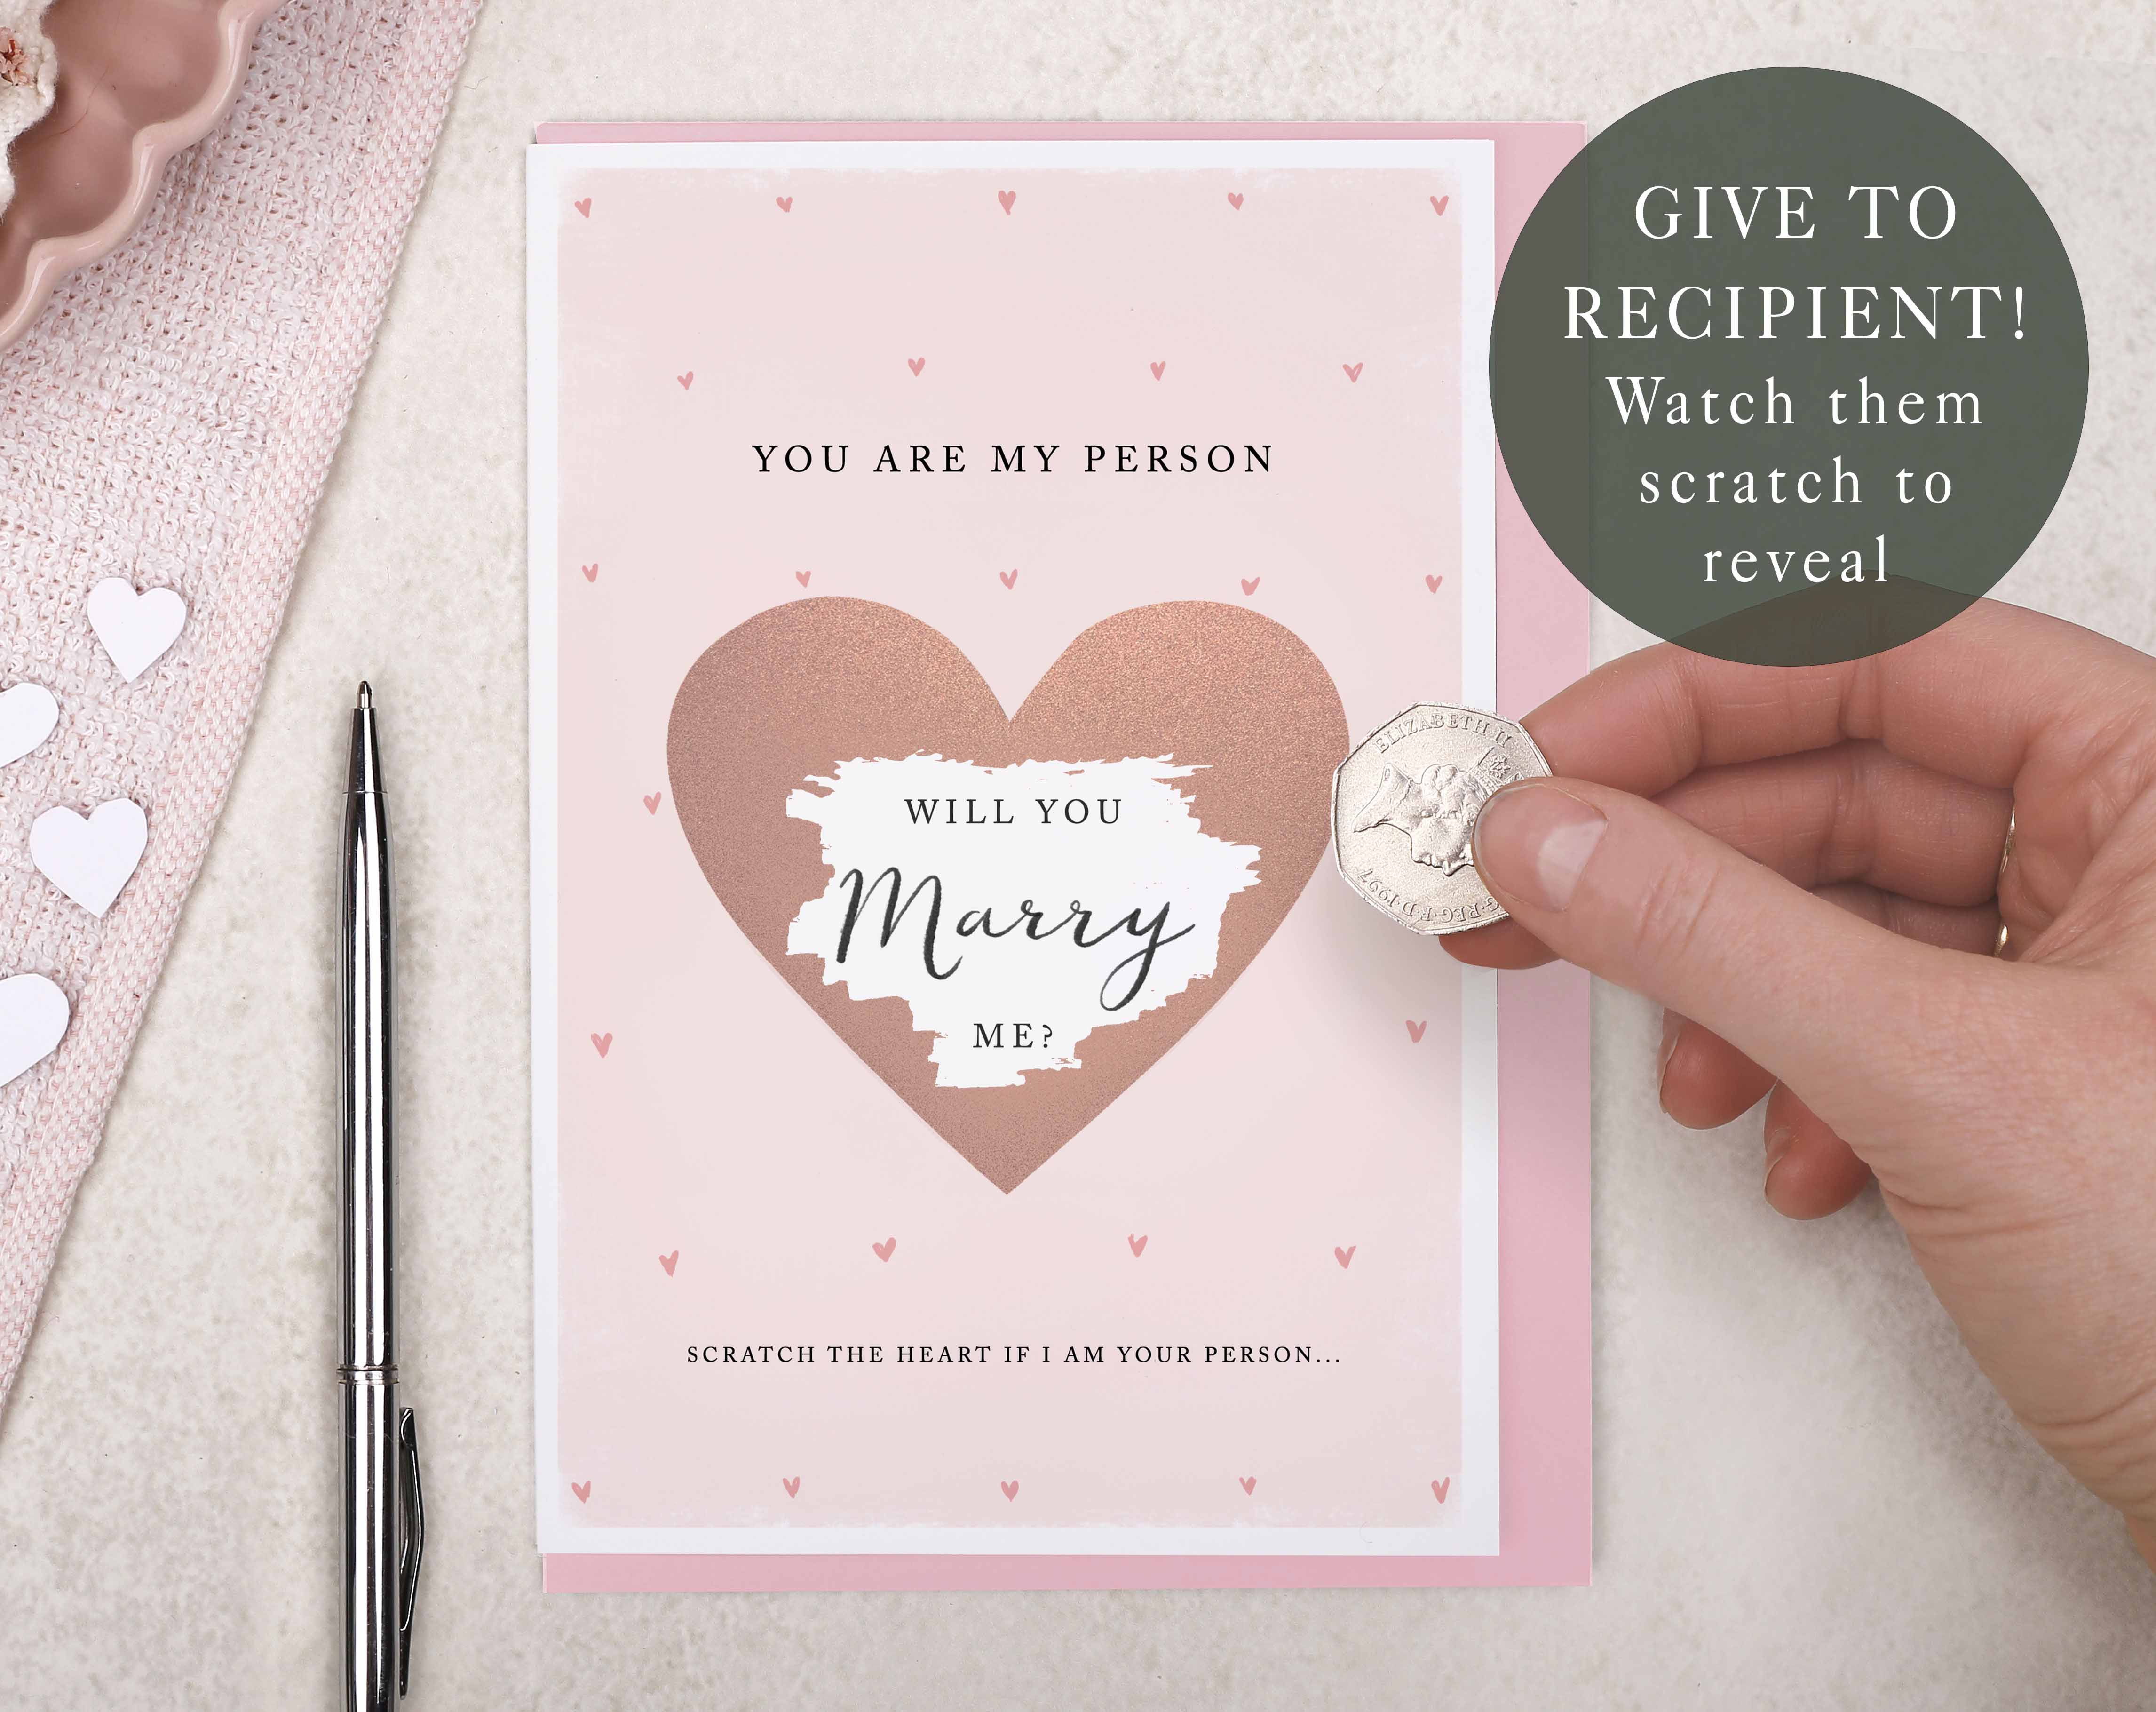 ou are my person, 'will you marry me' scratch to reveal proposal card